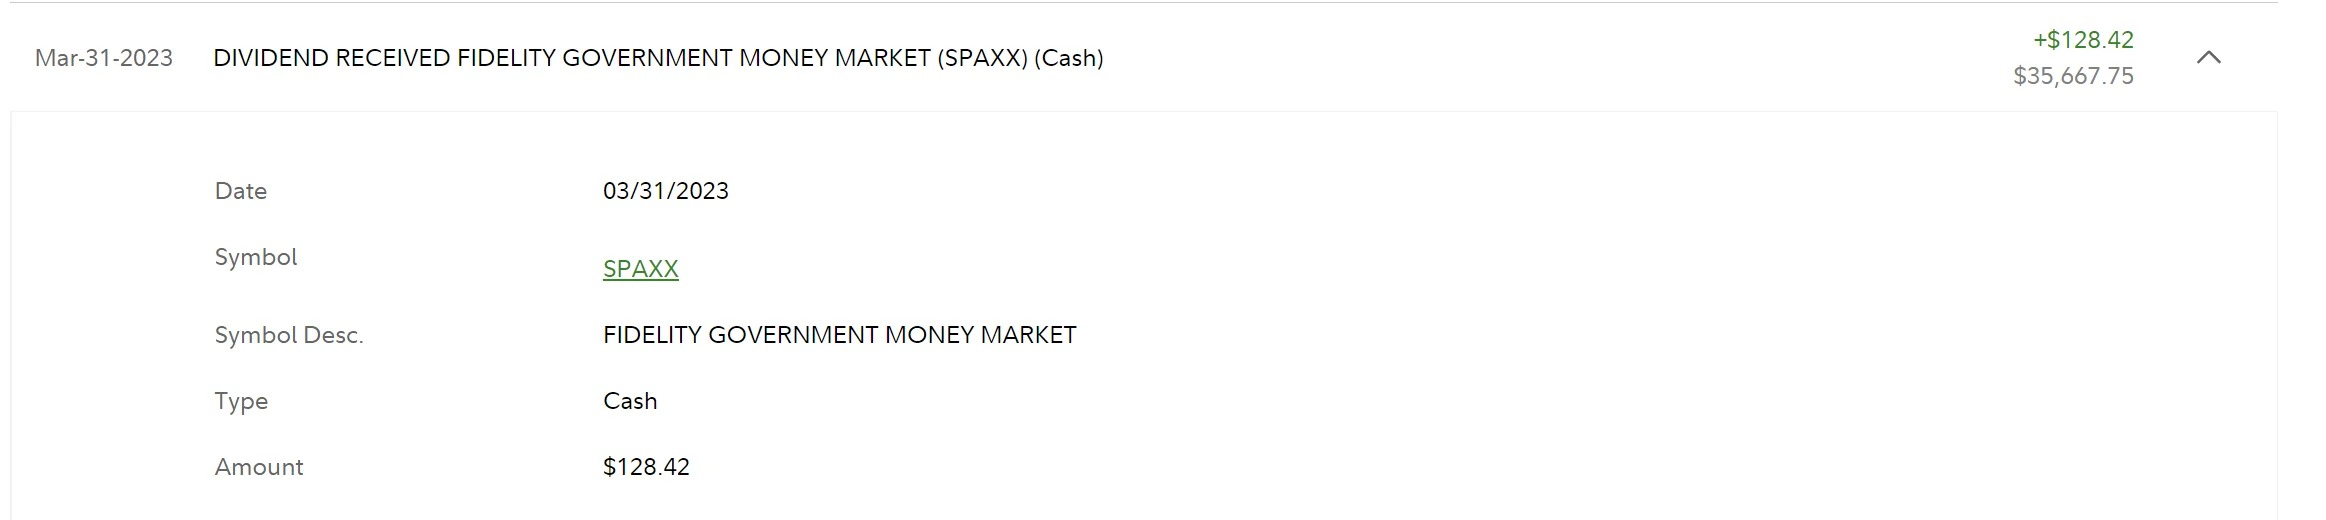 How Often Does SPAXX Pay Dividends?